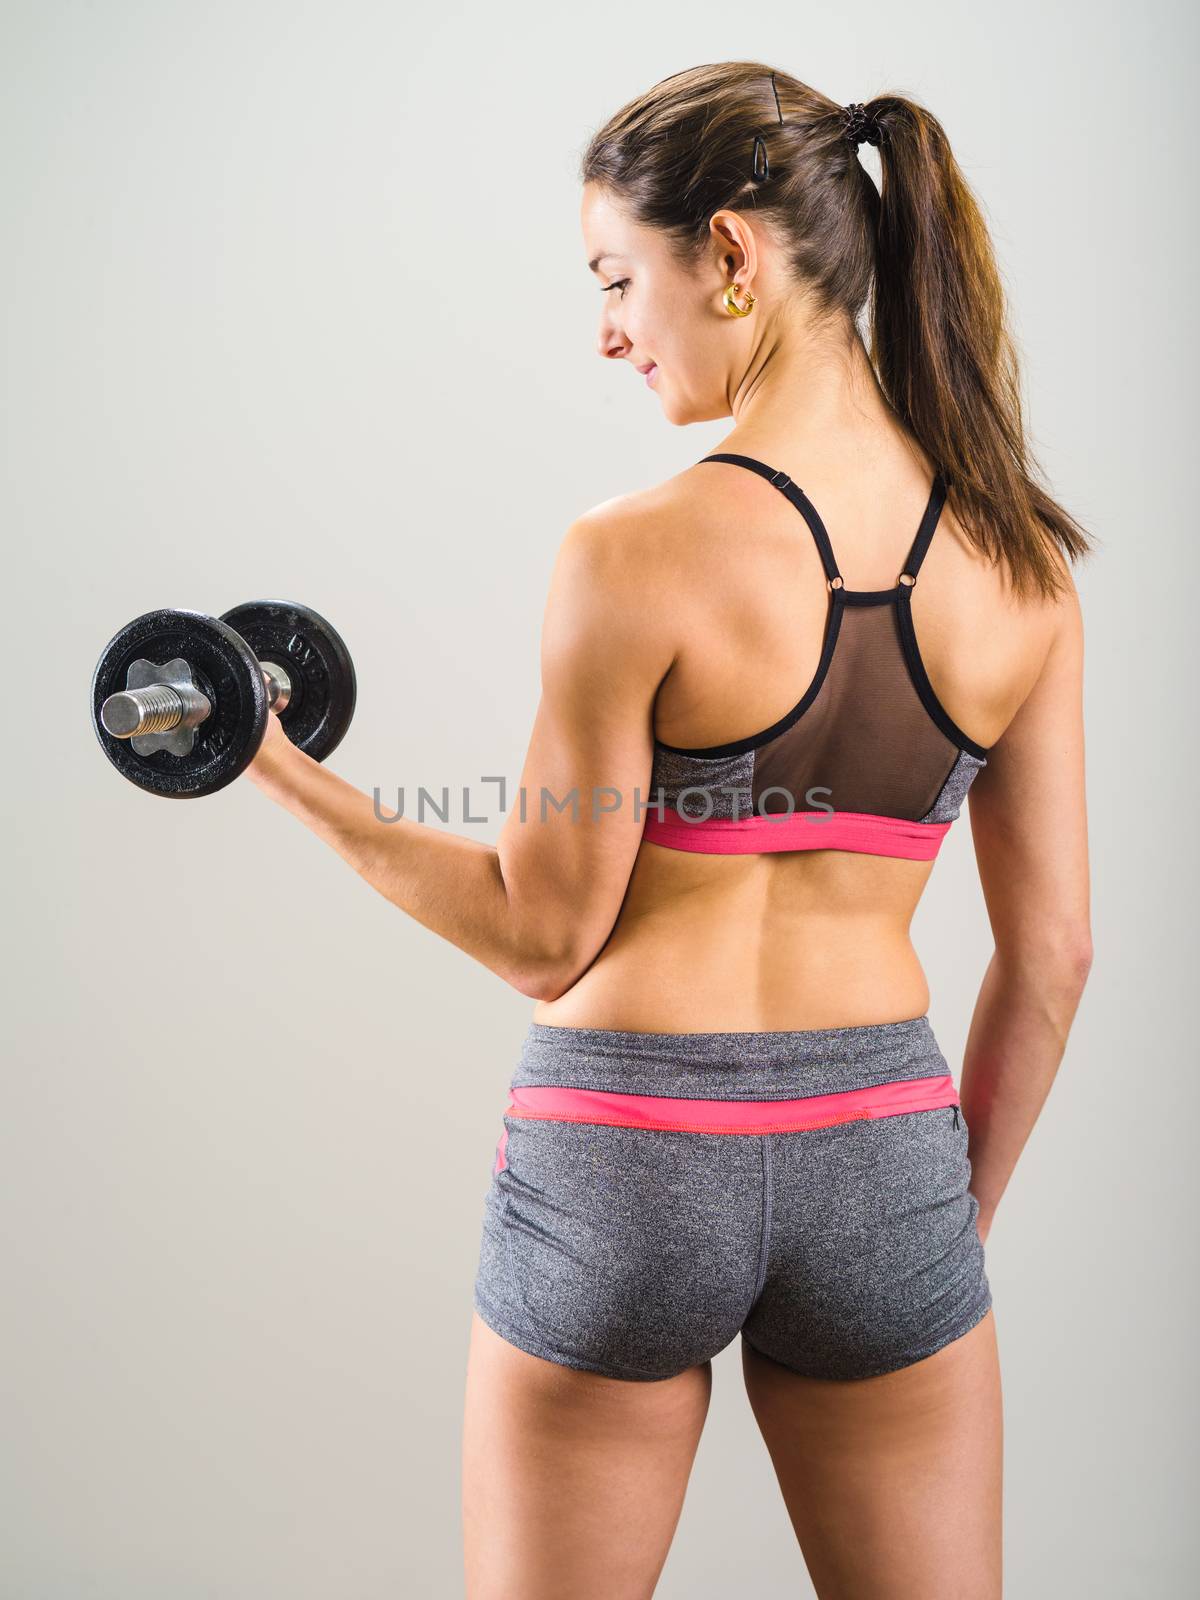 Photo of an attractive woman doing a dumbbell curl while standing.
